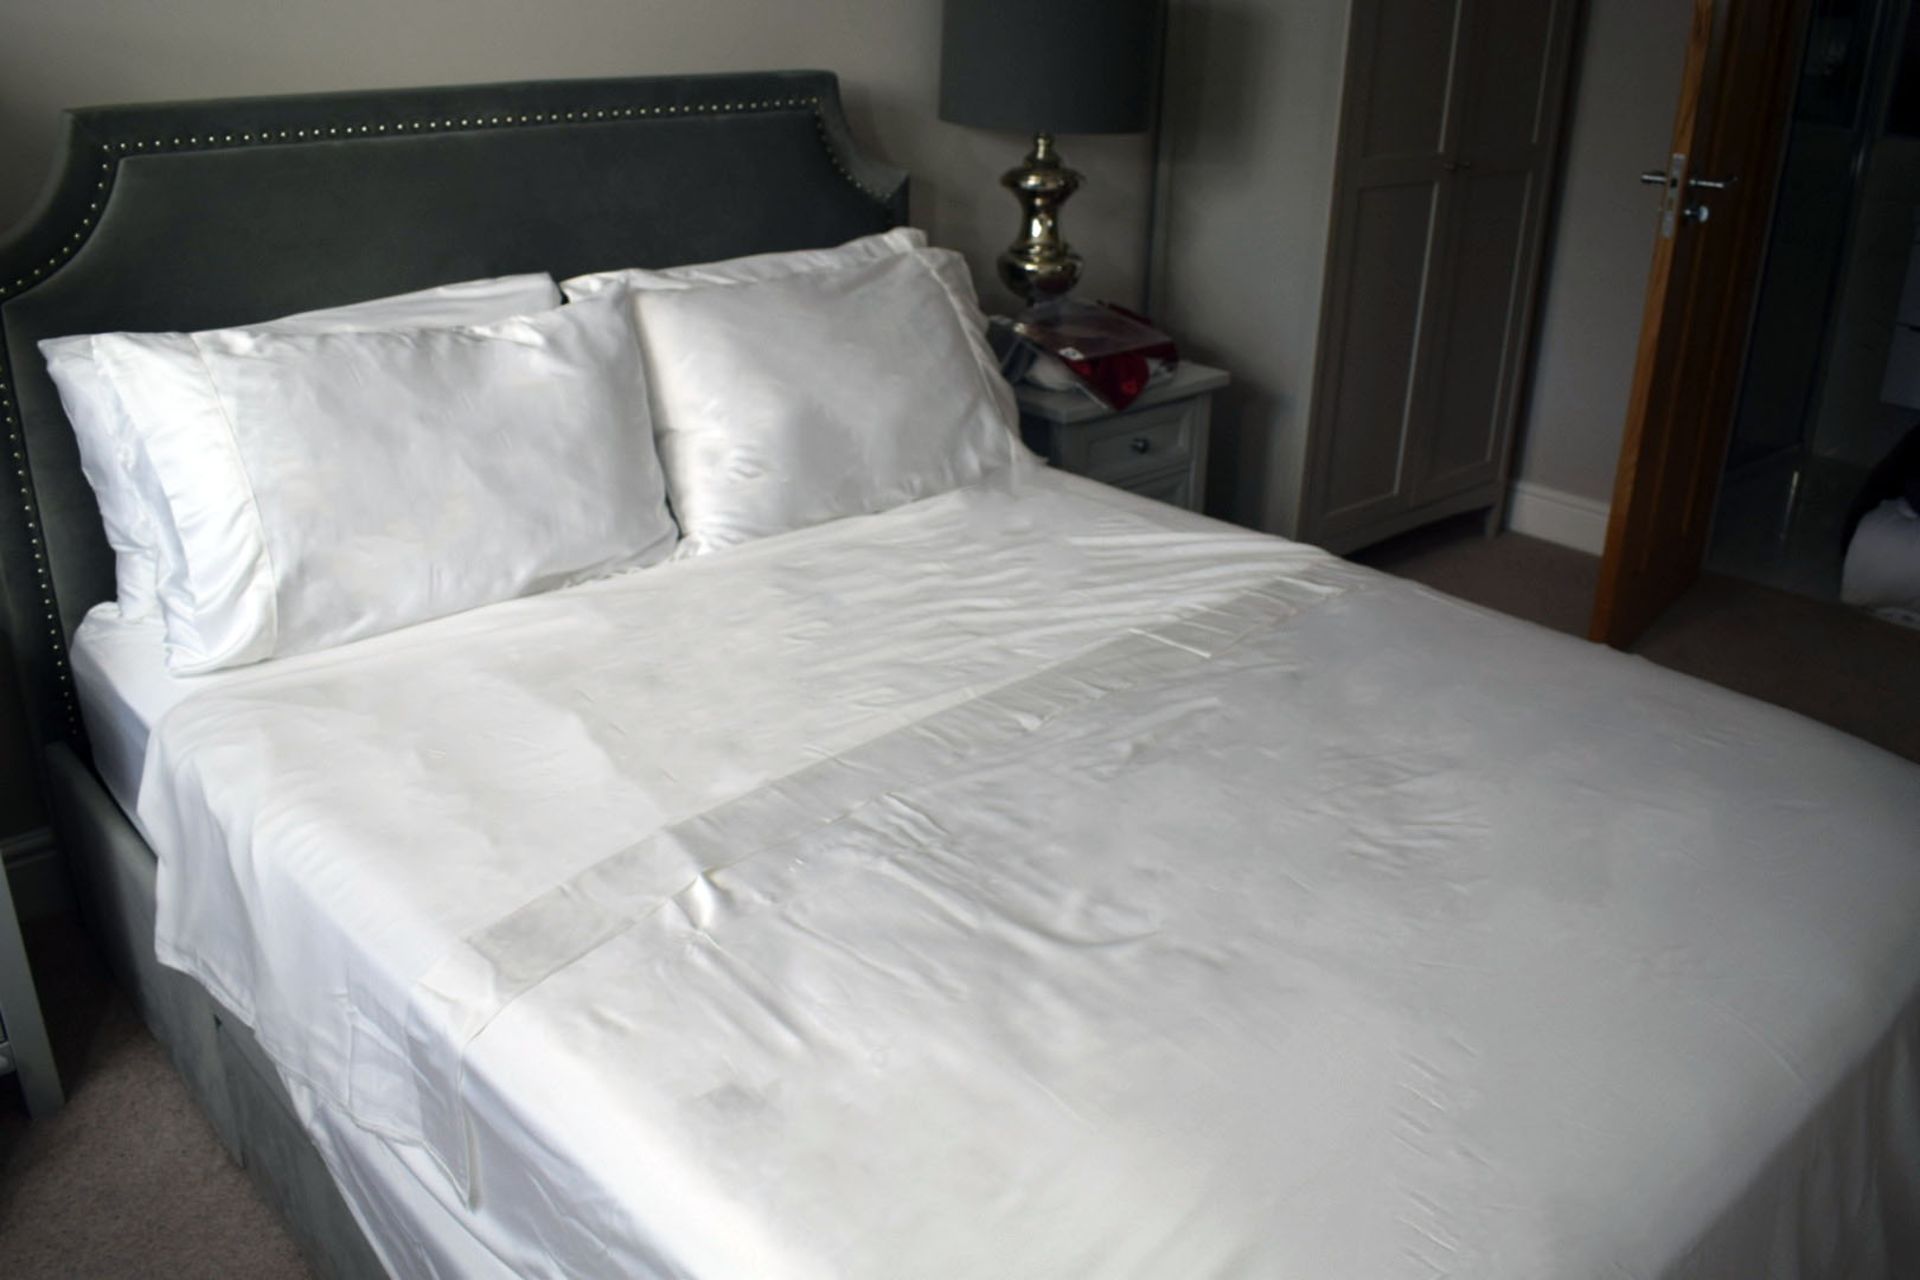 6 x White Bamboo Bed Linen Set (Double) - Duvet Cover, Fitted Sheet, Flat Sheet, 2 Pillowcases - Image 6 of 9